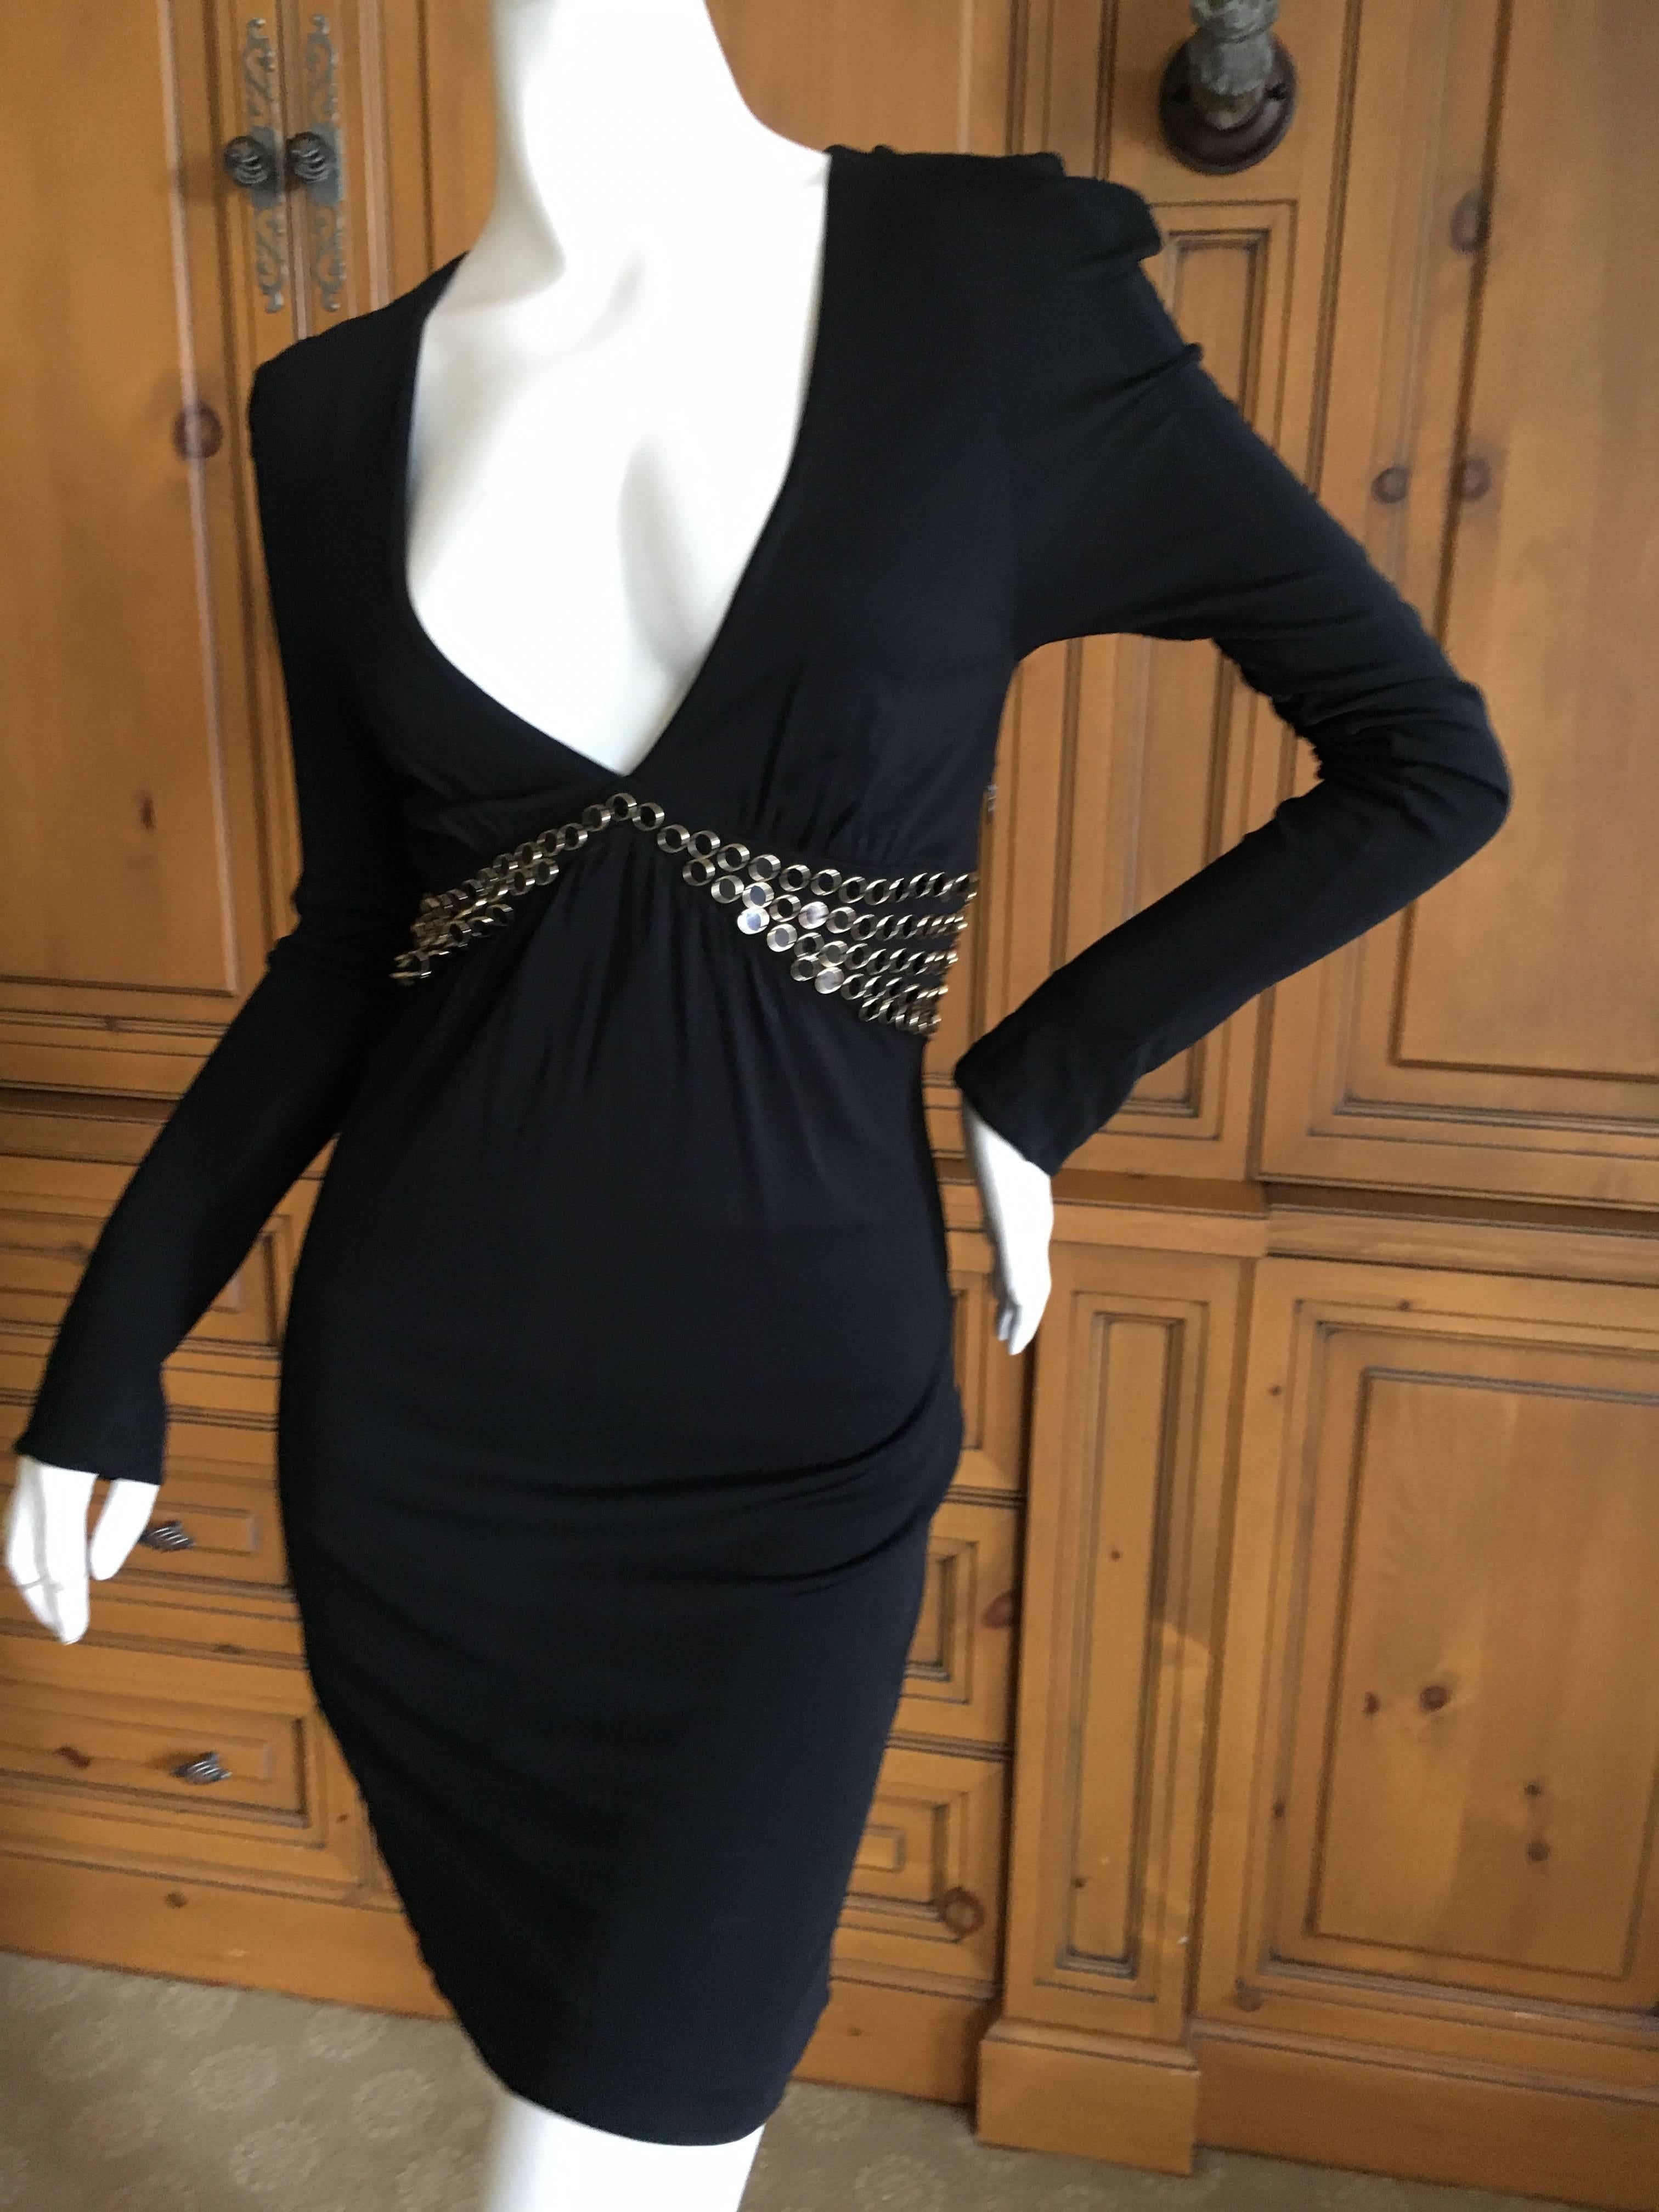 Gucci Low Cut Embellished Little Black Dress by Tom Ford In Excellent Condition For Sale In Cloverdale, CA